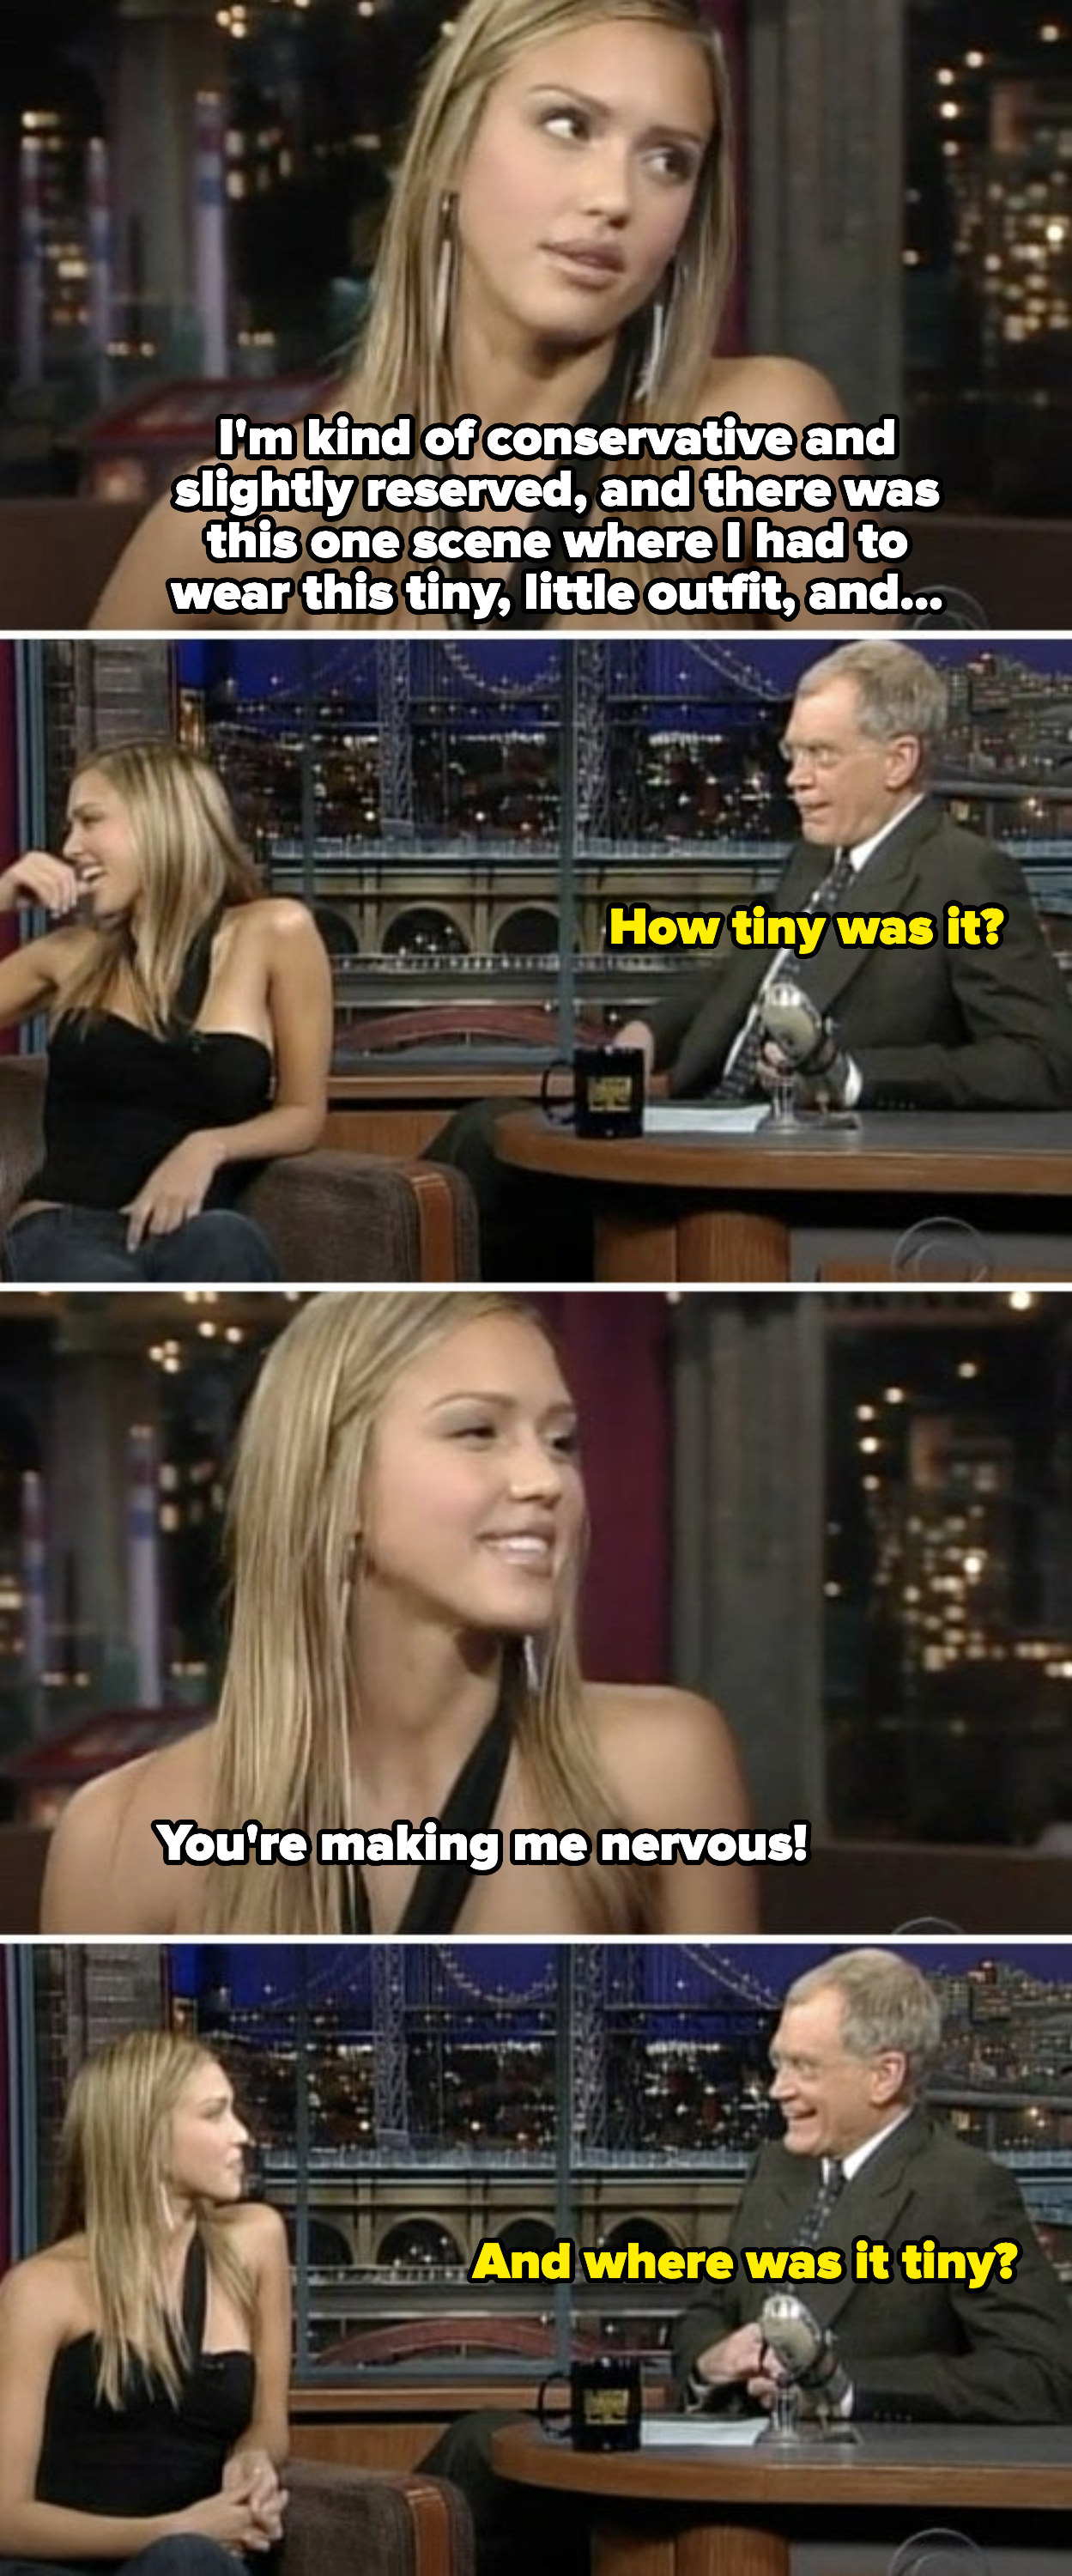 Letterman repeatedly asking Alba &quot;How tiny was it? Where was it tiny?&quot;